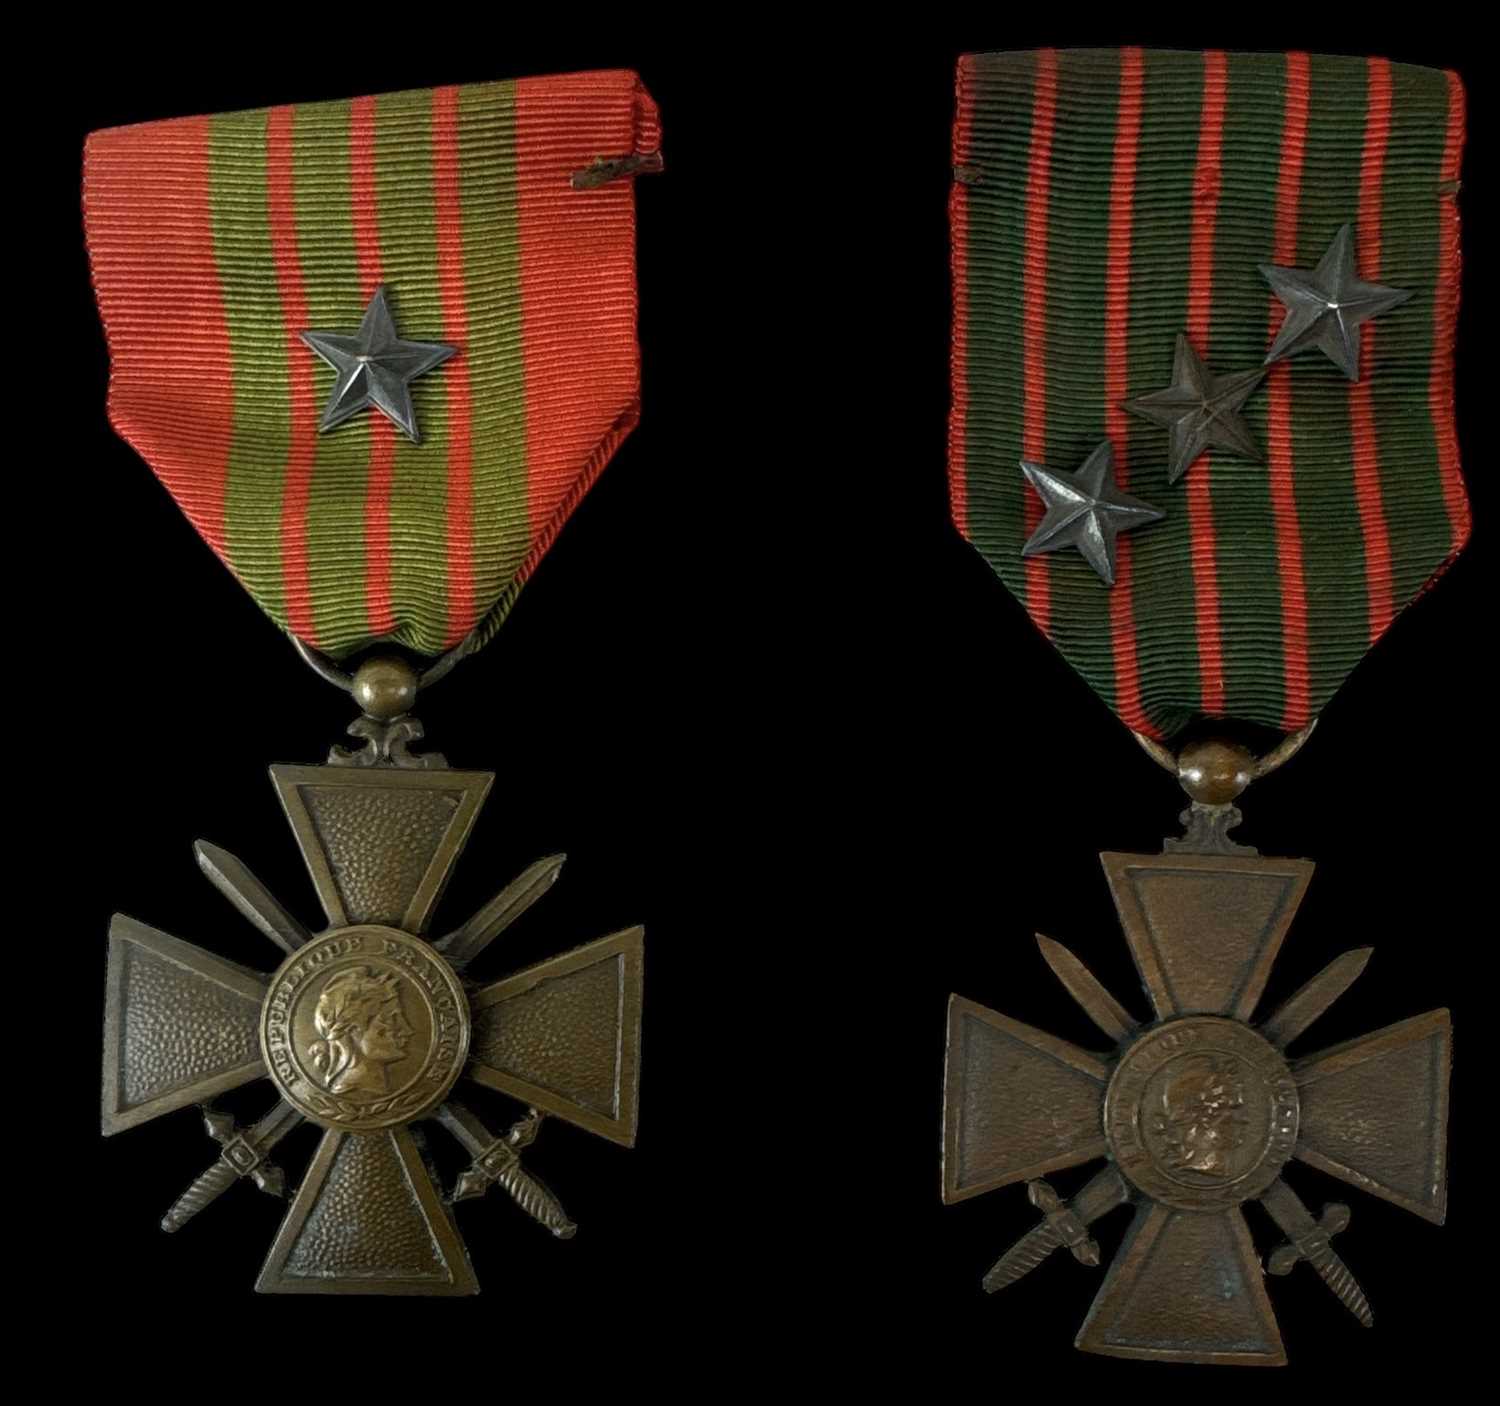 A French Croix de Guerre 1939 bronze star medal and a French Croix de Guerre 1914-15 issue bronze